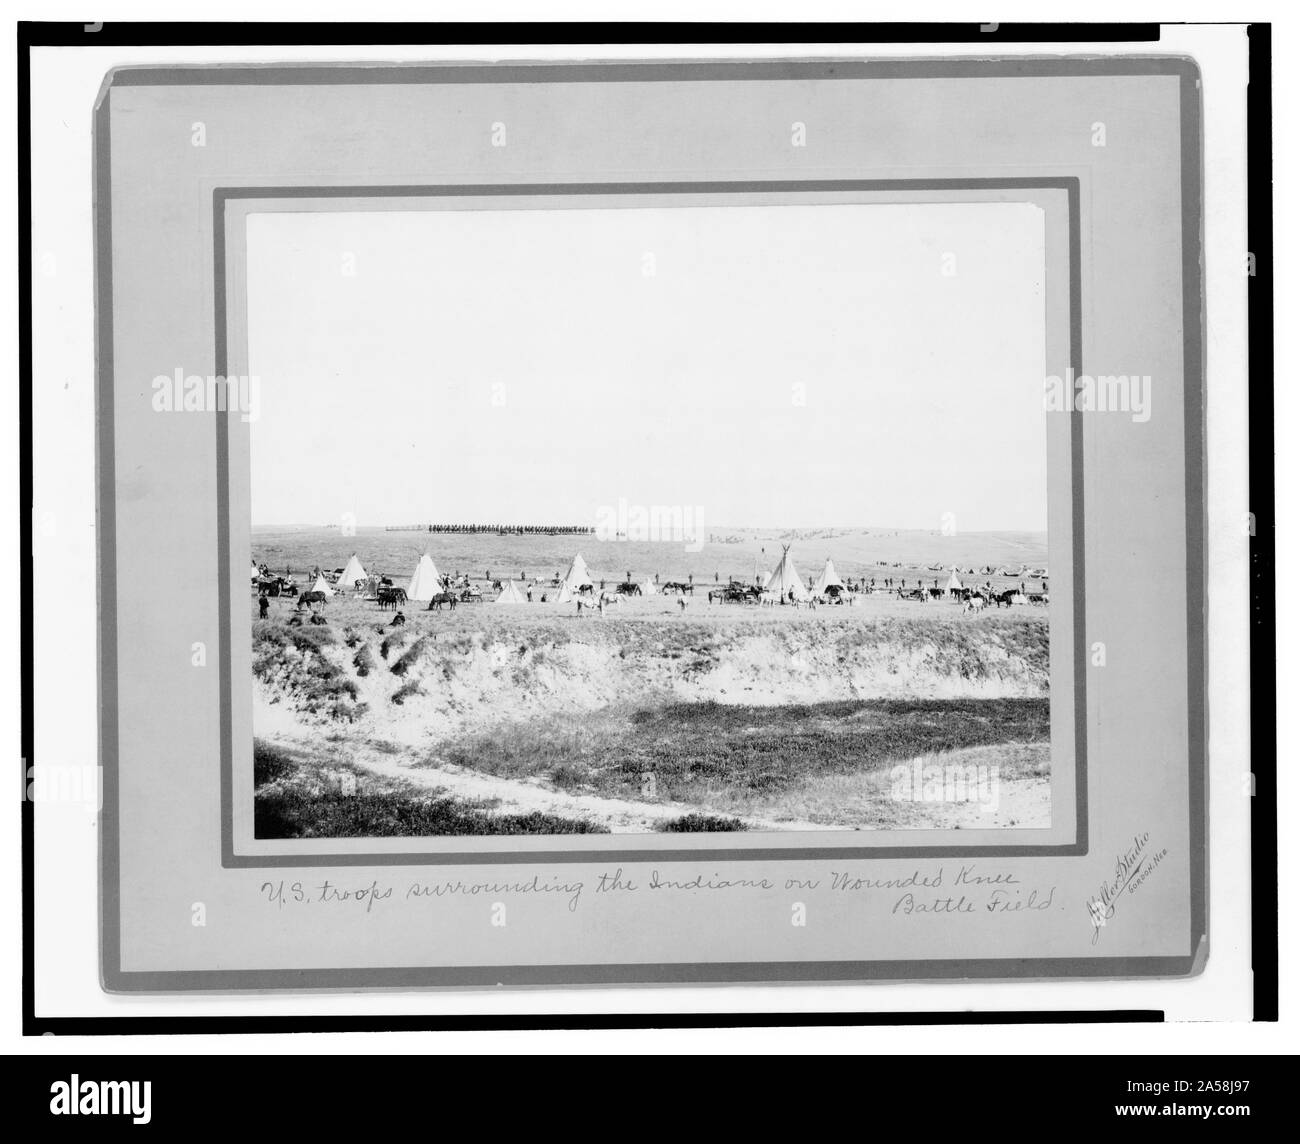 U.S. troops surrounding the Indians on Wounded Knee battle field / Miller Studio, Gordon, Neb. Stock Photo